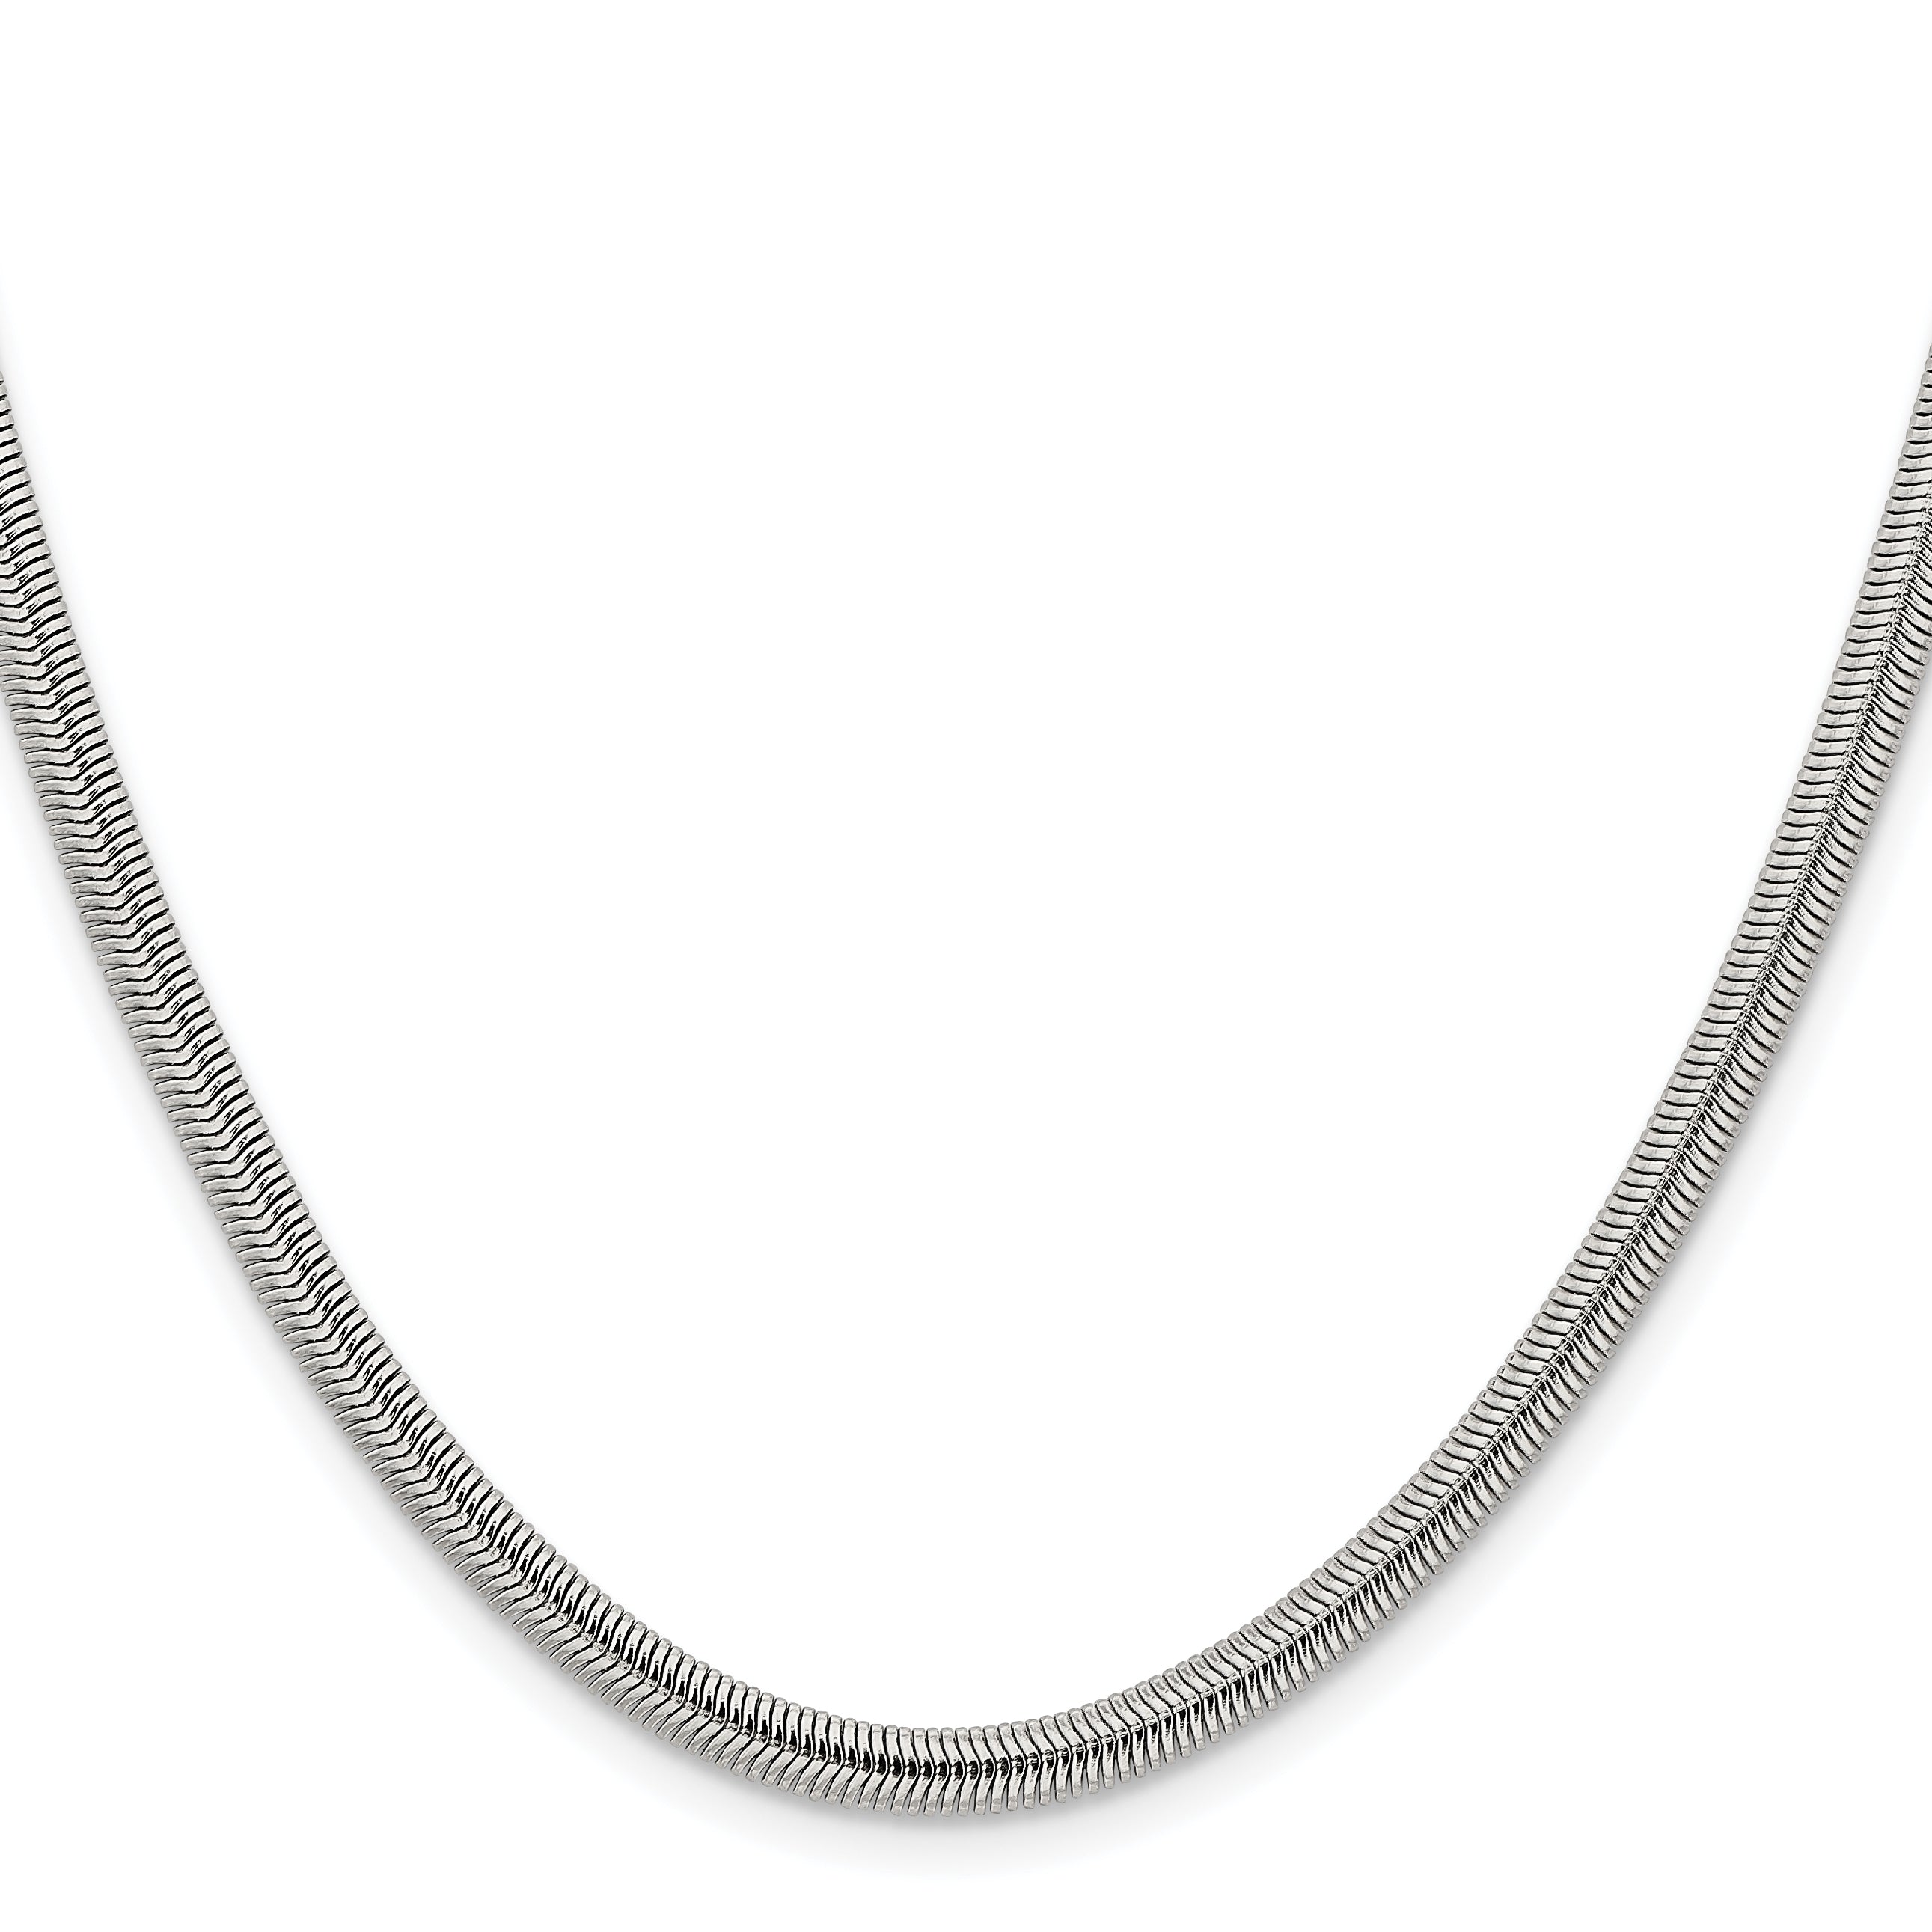 Chisel Stainless Steel Polished 4.2mm 20 inch Flat Snake Chain